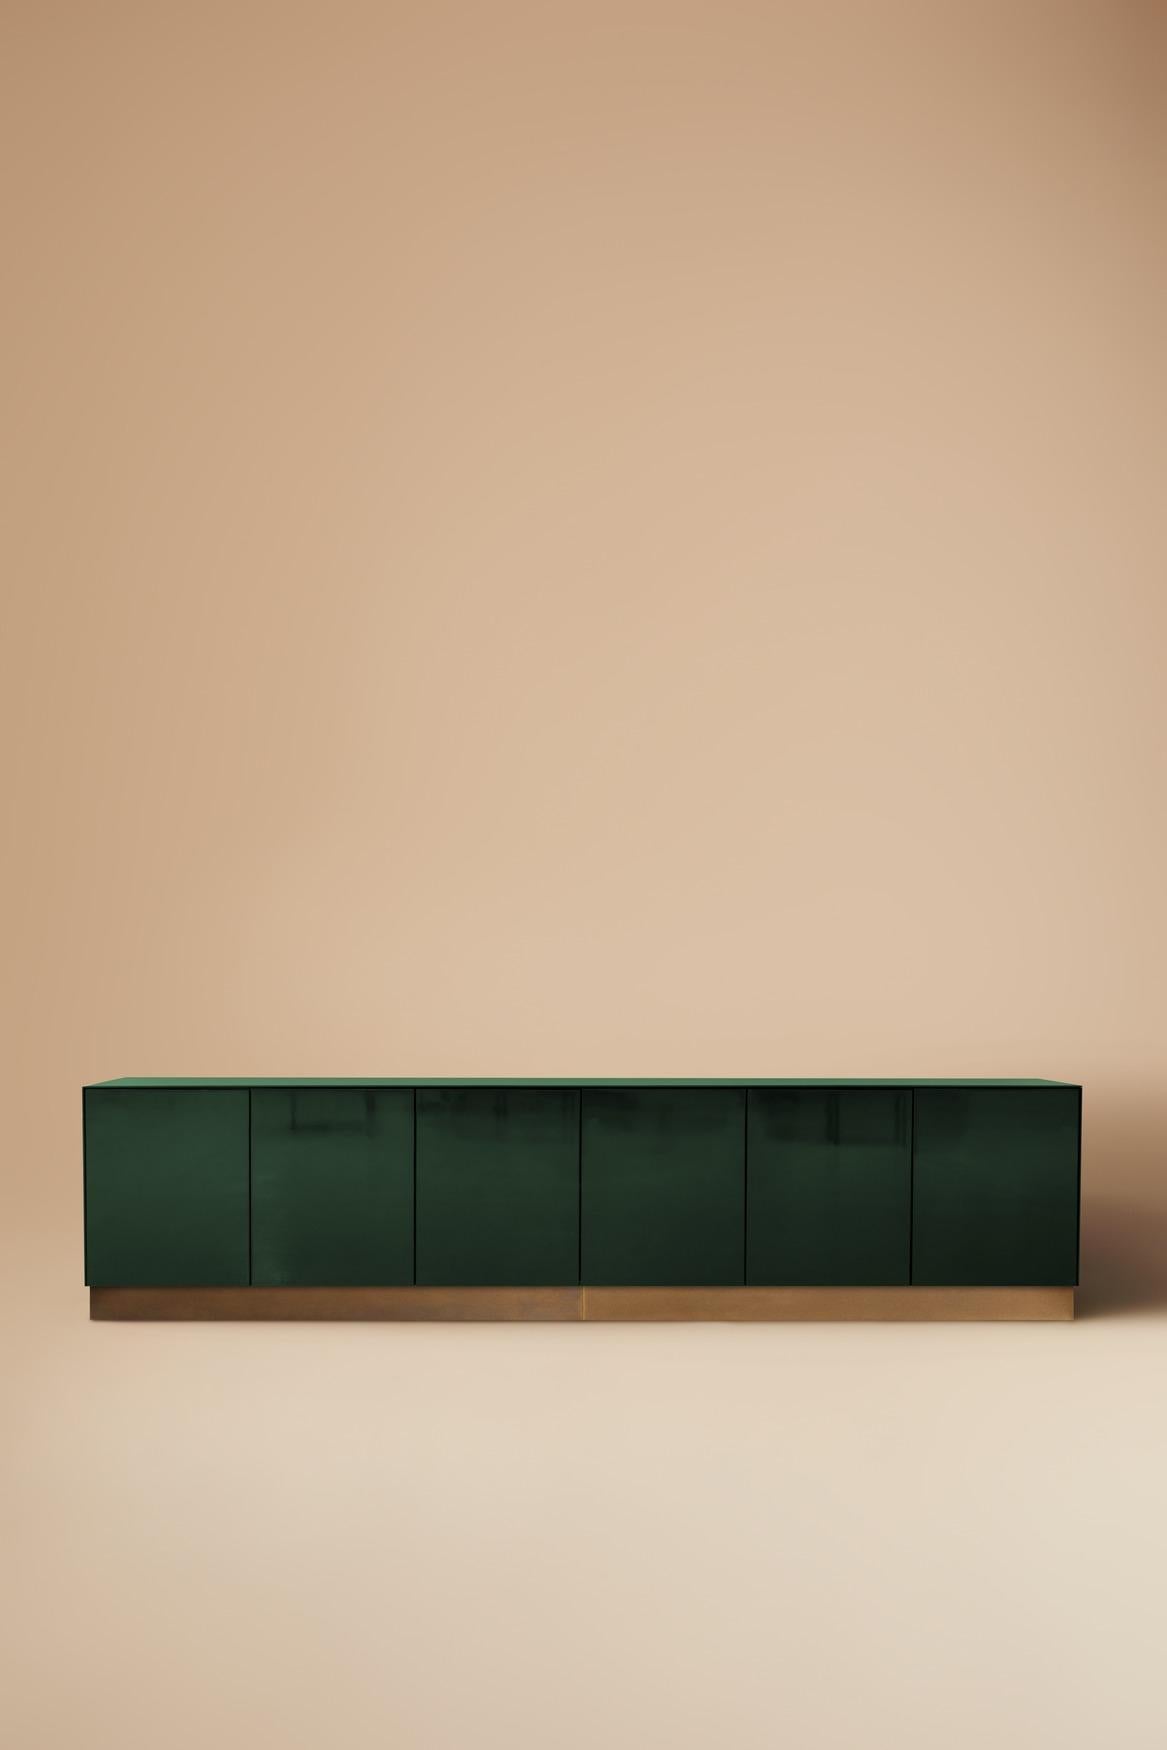 Minimalist Promenade Low Unit Handcrafted in Green High Gloss Steel with Oxidised Brass